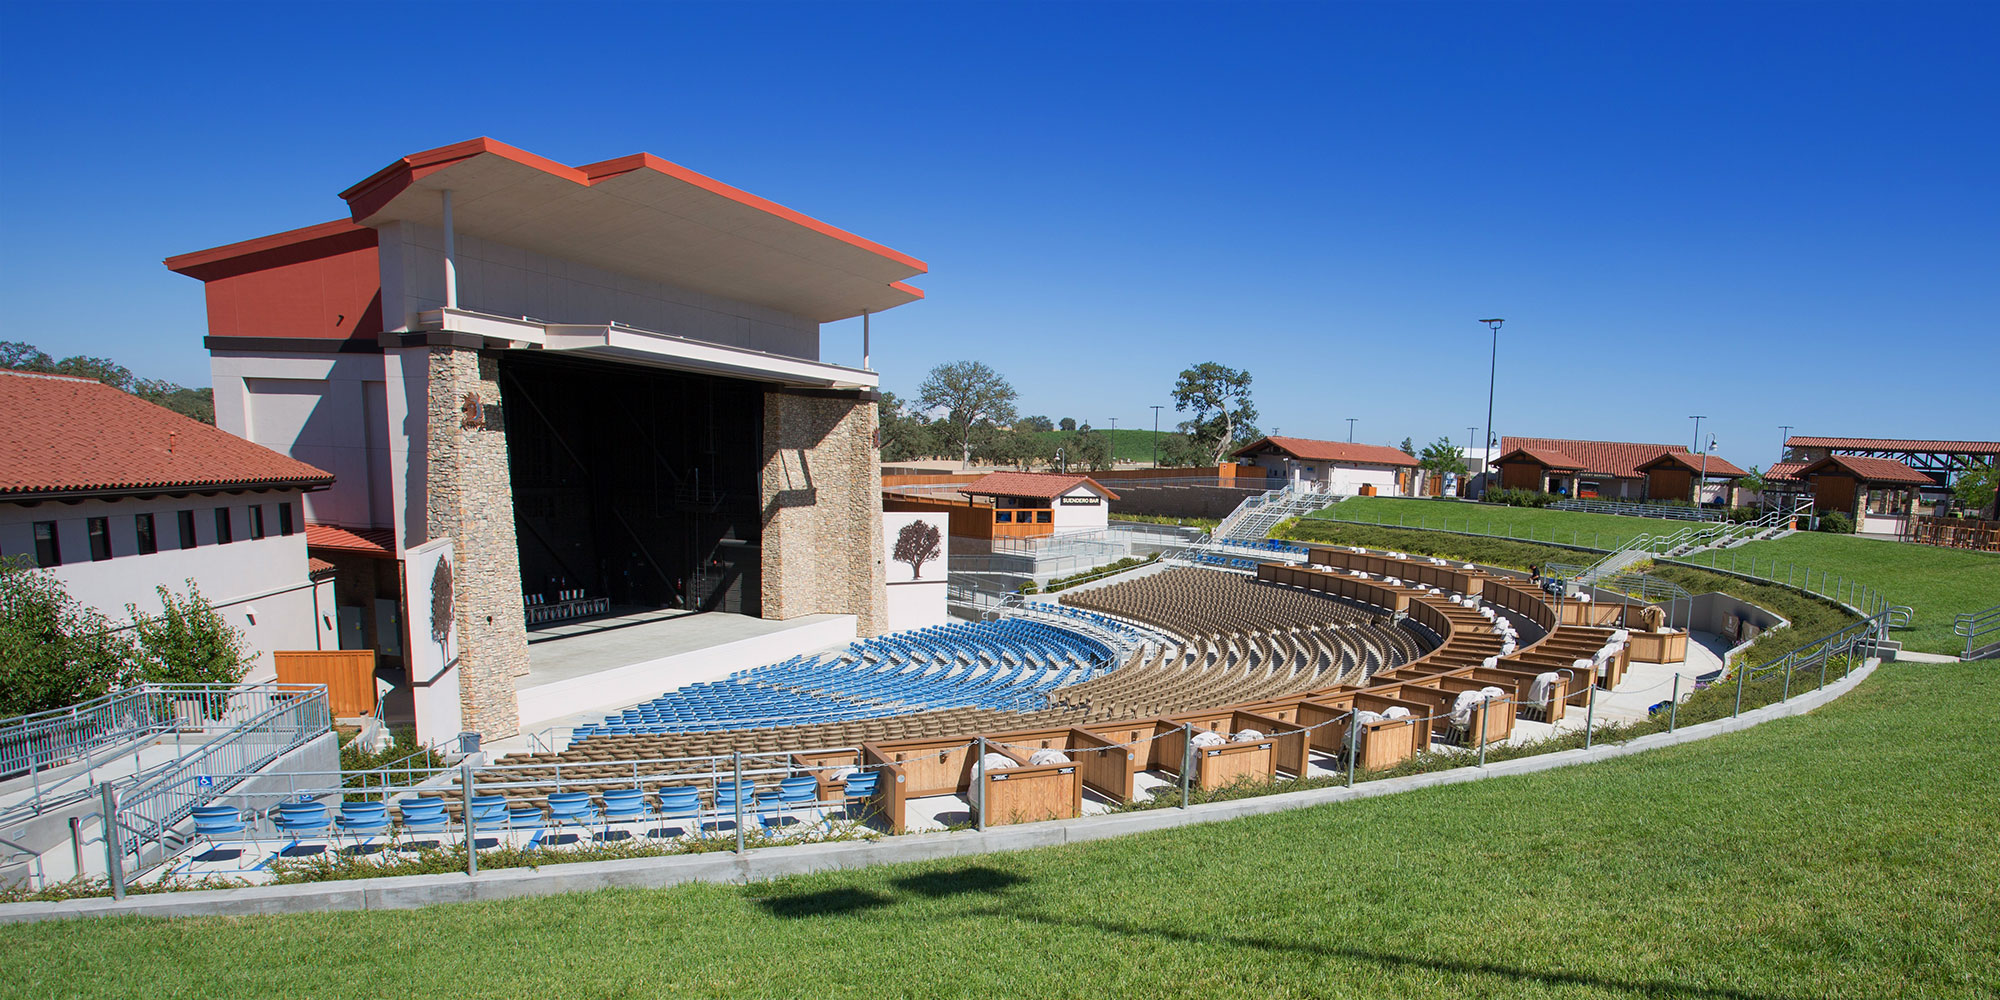 Paso Robles Amphitheater Building Contractor - Event Center Builder - JW Design and Construction 